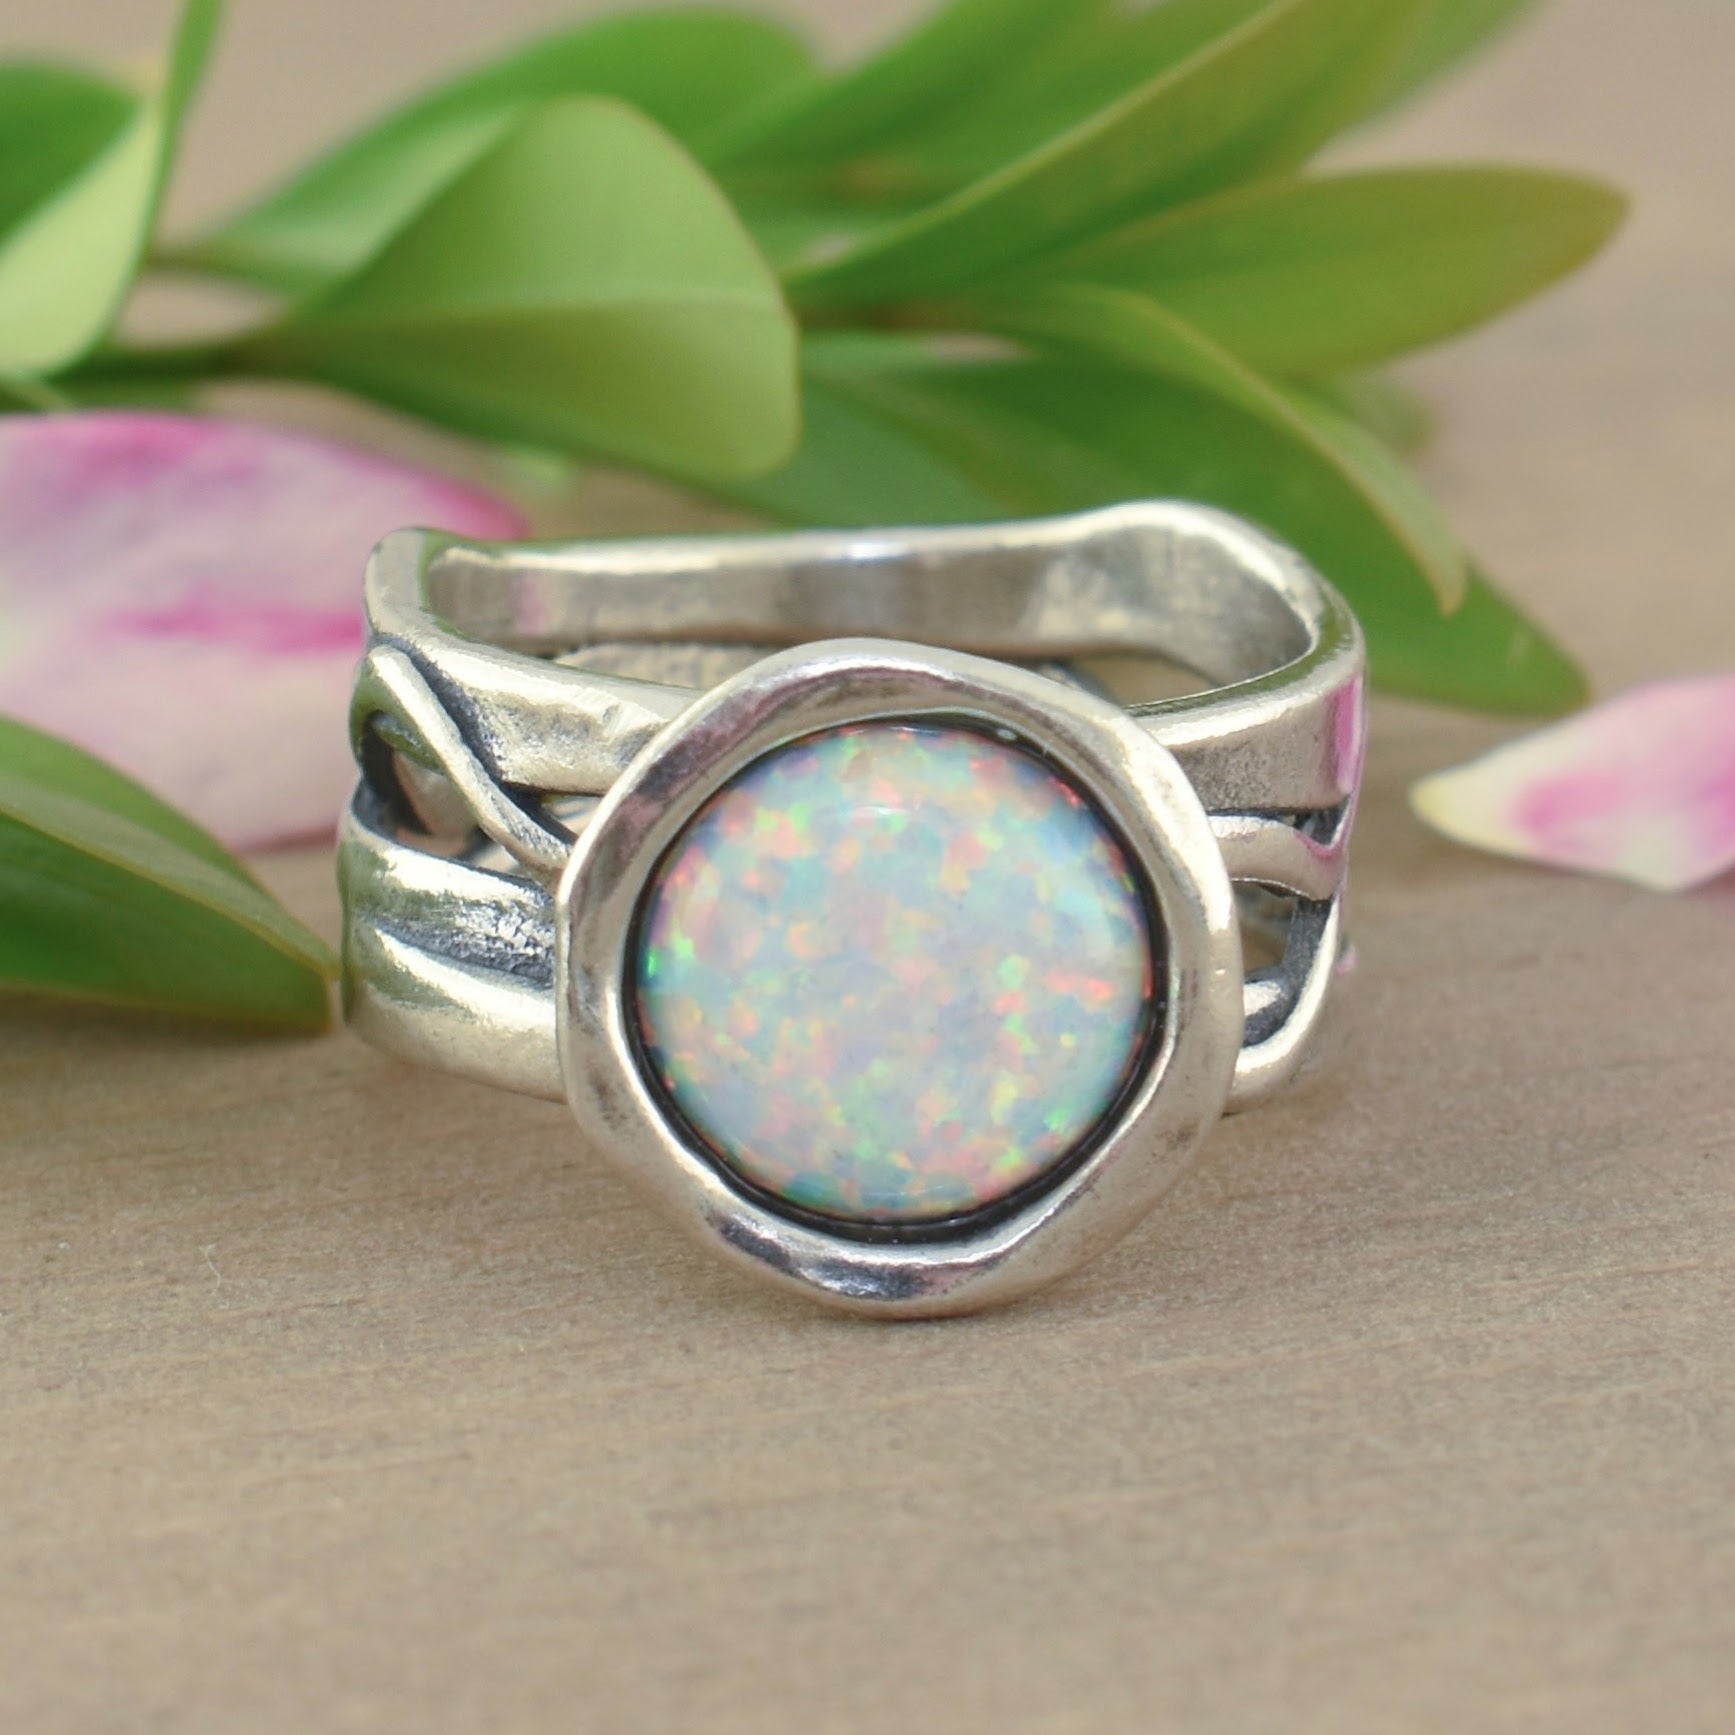 .925 sterling silver ring with bezel set reconstructed opal stone